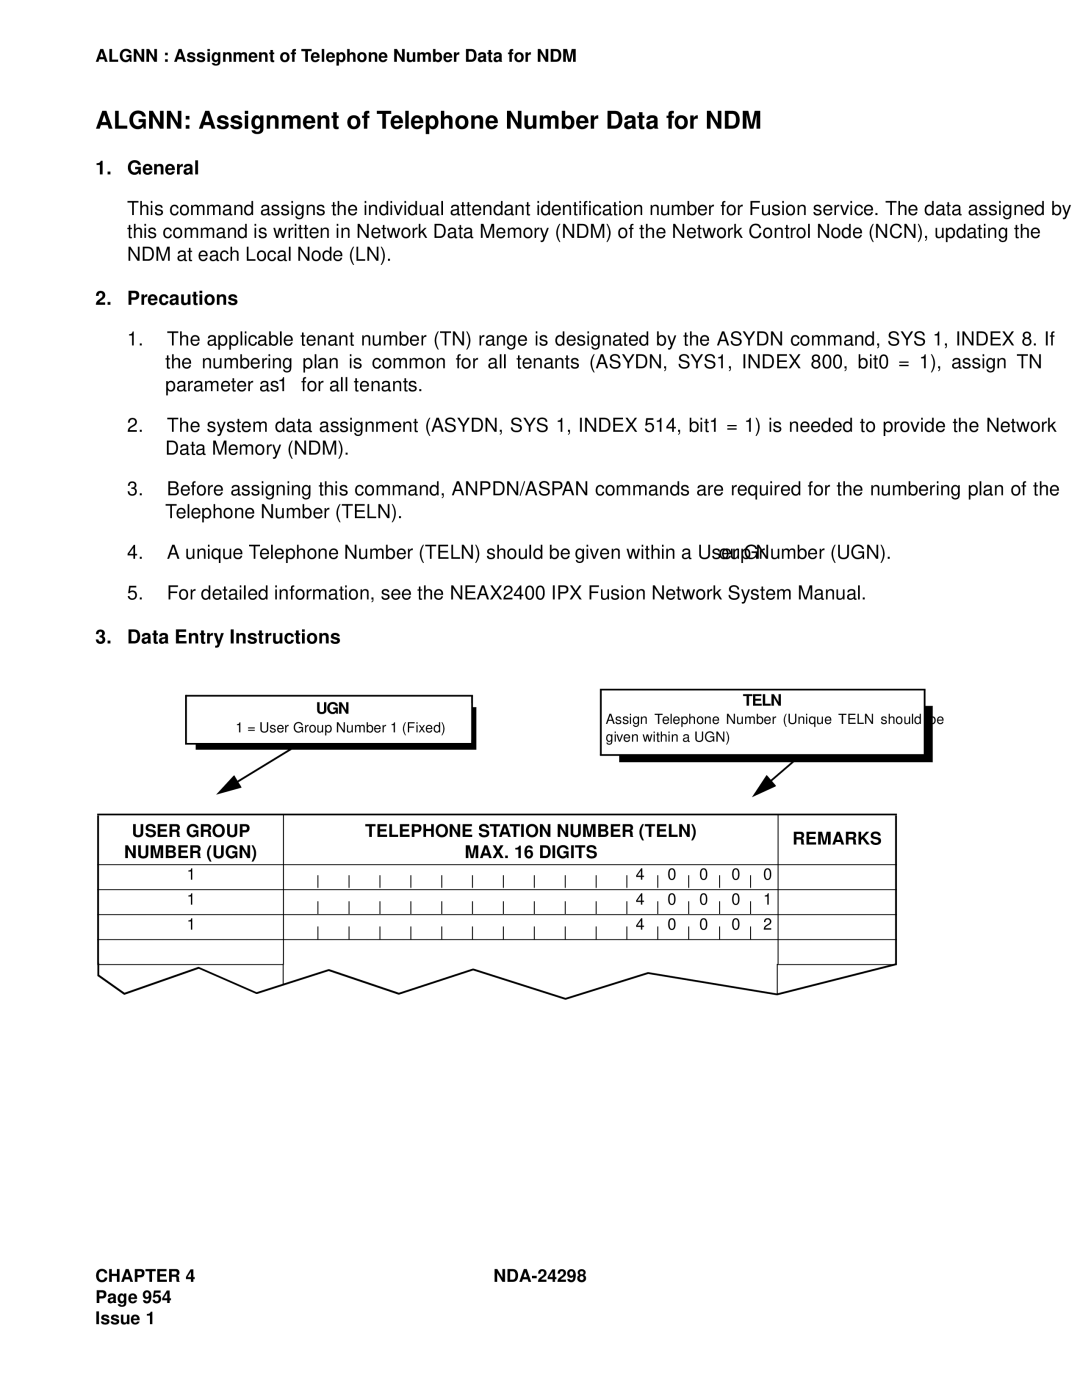 NEC NDA-24298 manual Algnn Assignment of Telephone Number Data for NDM 